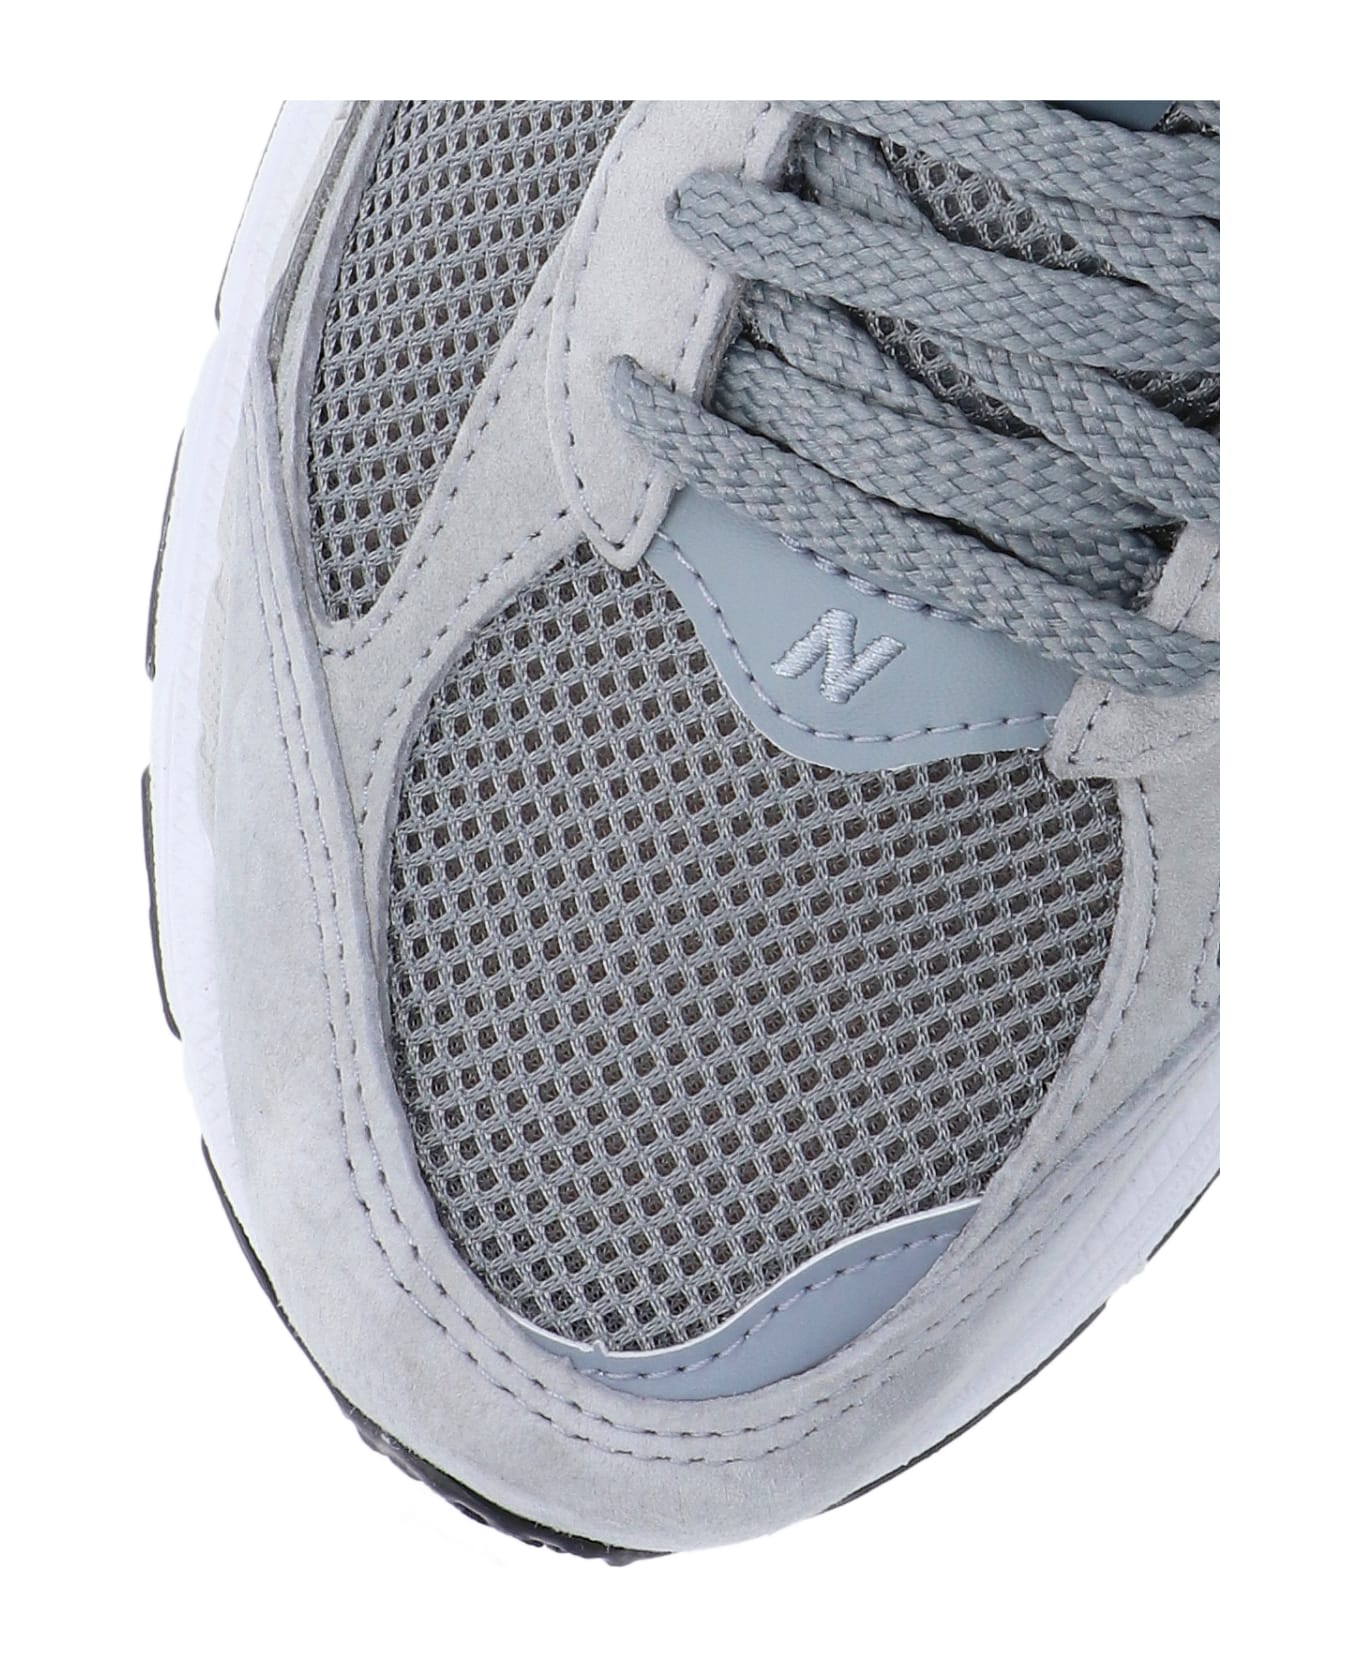 New Balance '2002r' Sneakers - Gray